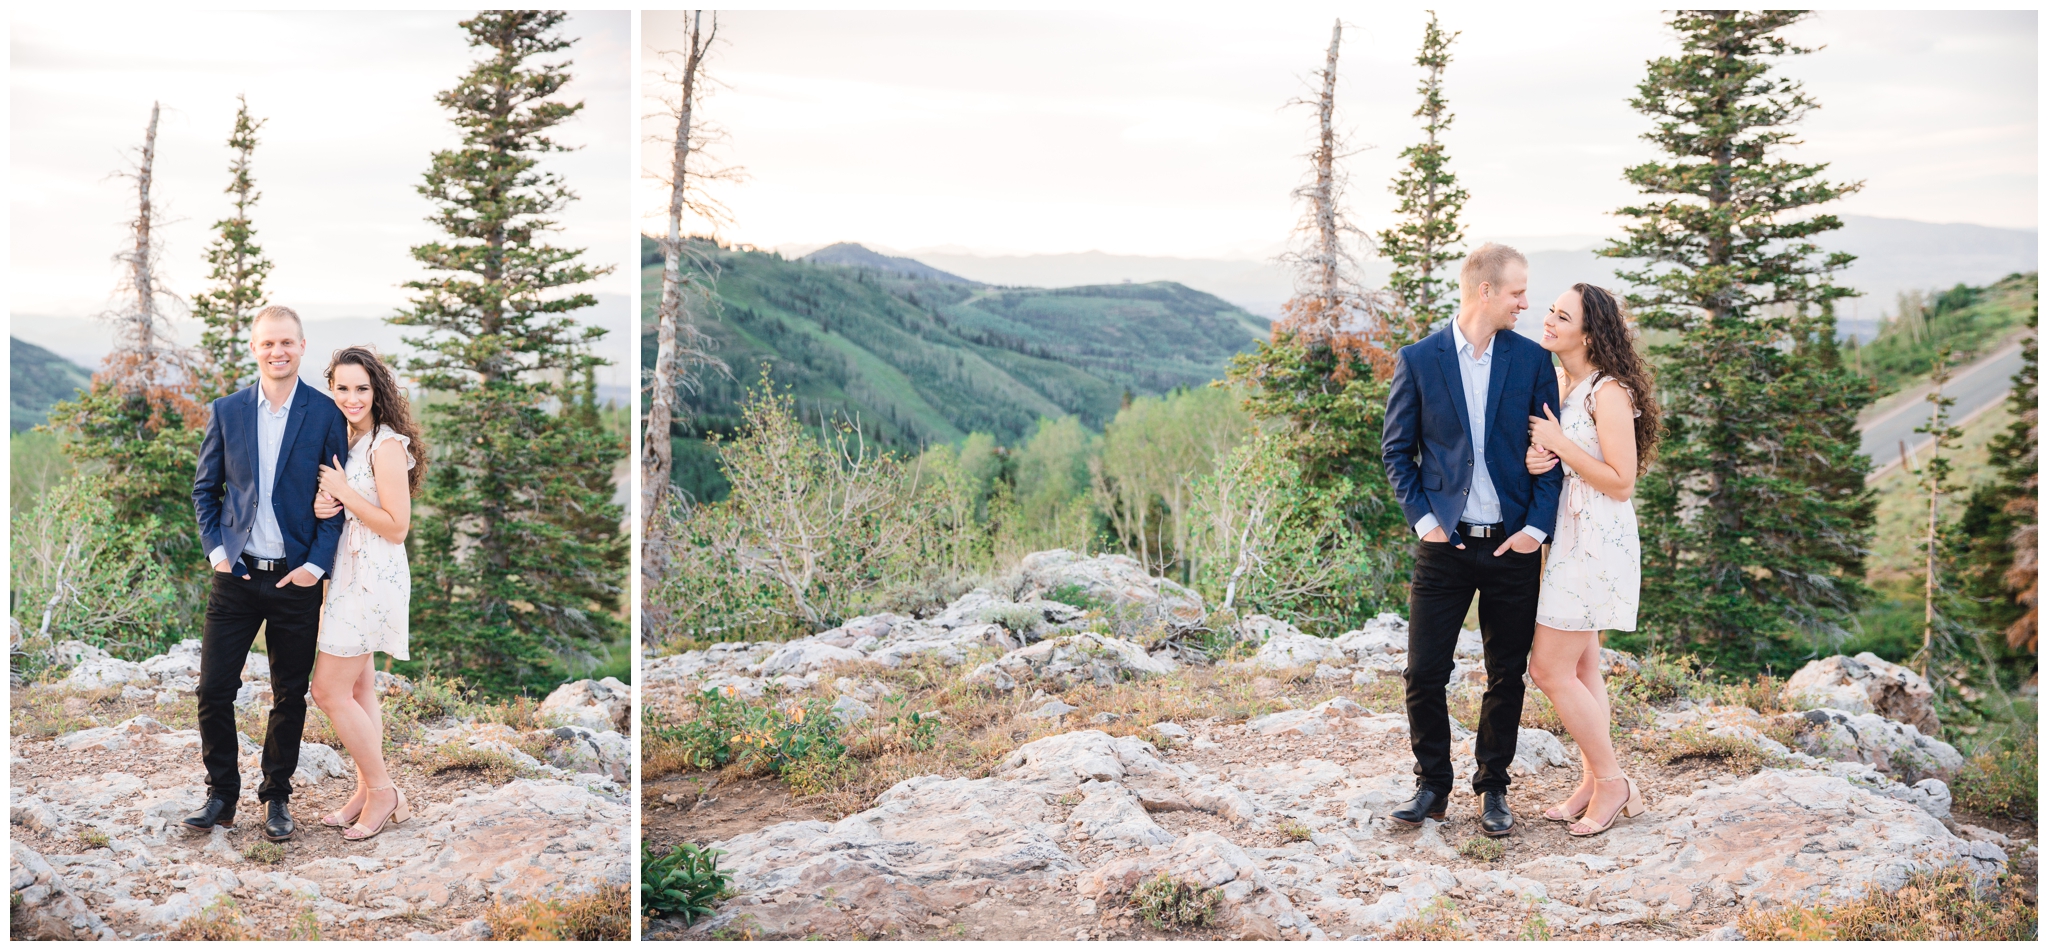 Park City Engagements near the pine trees and mountainside